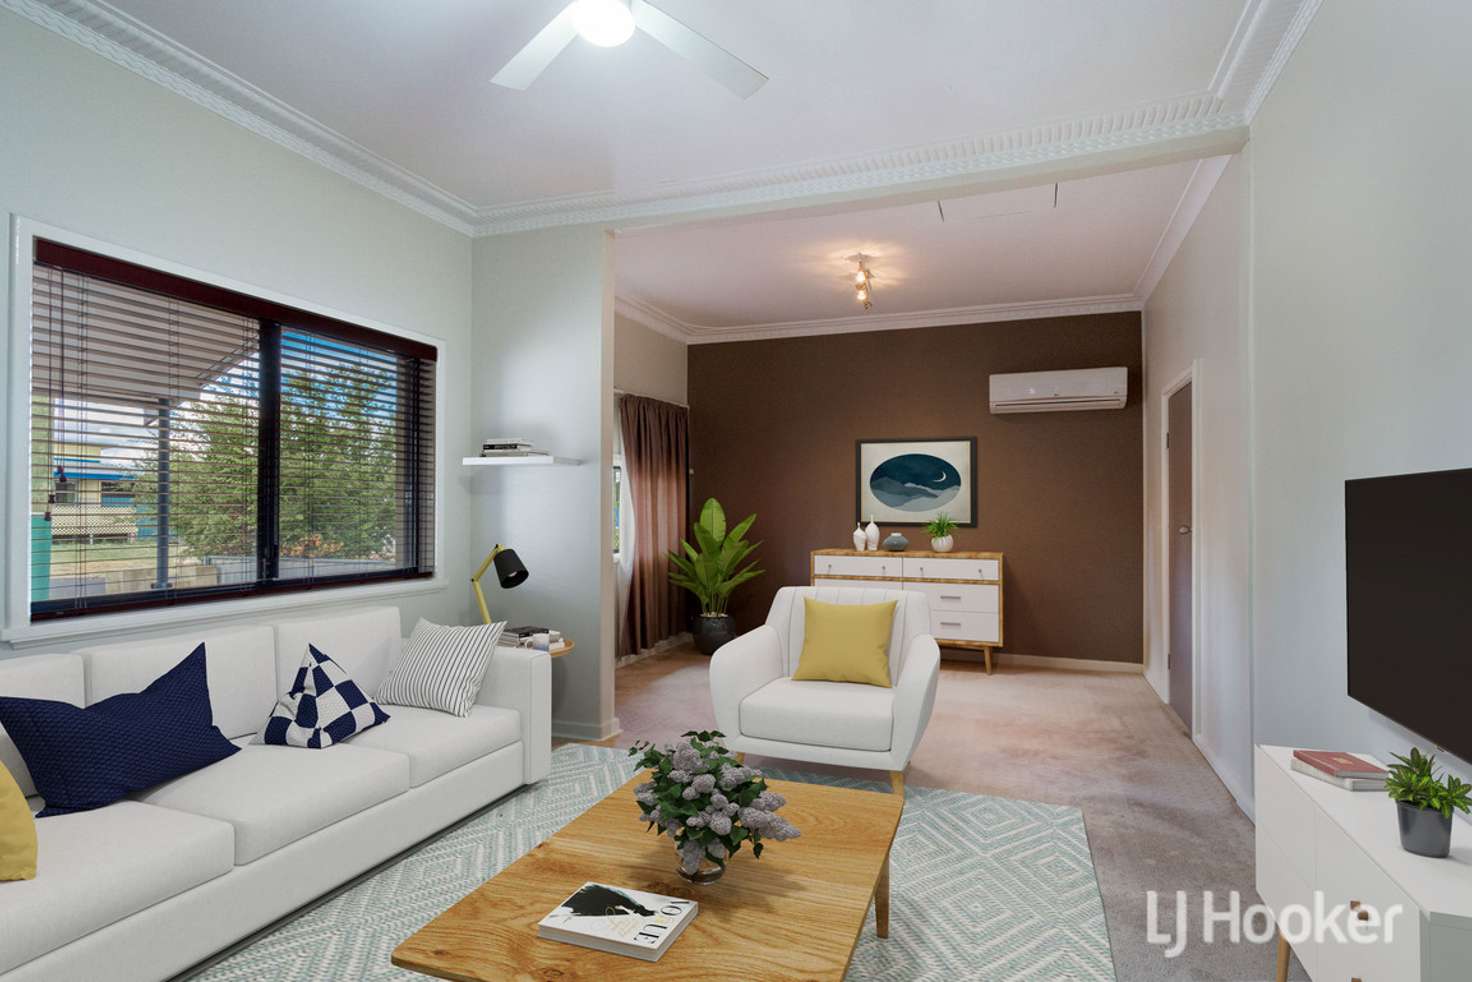 Main view of Homely house listing, 27 Jones Street, Collie WA 6225